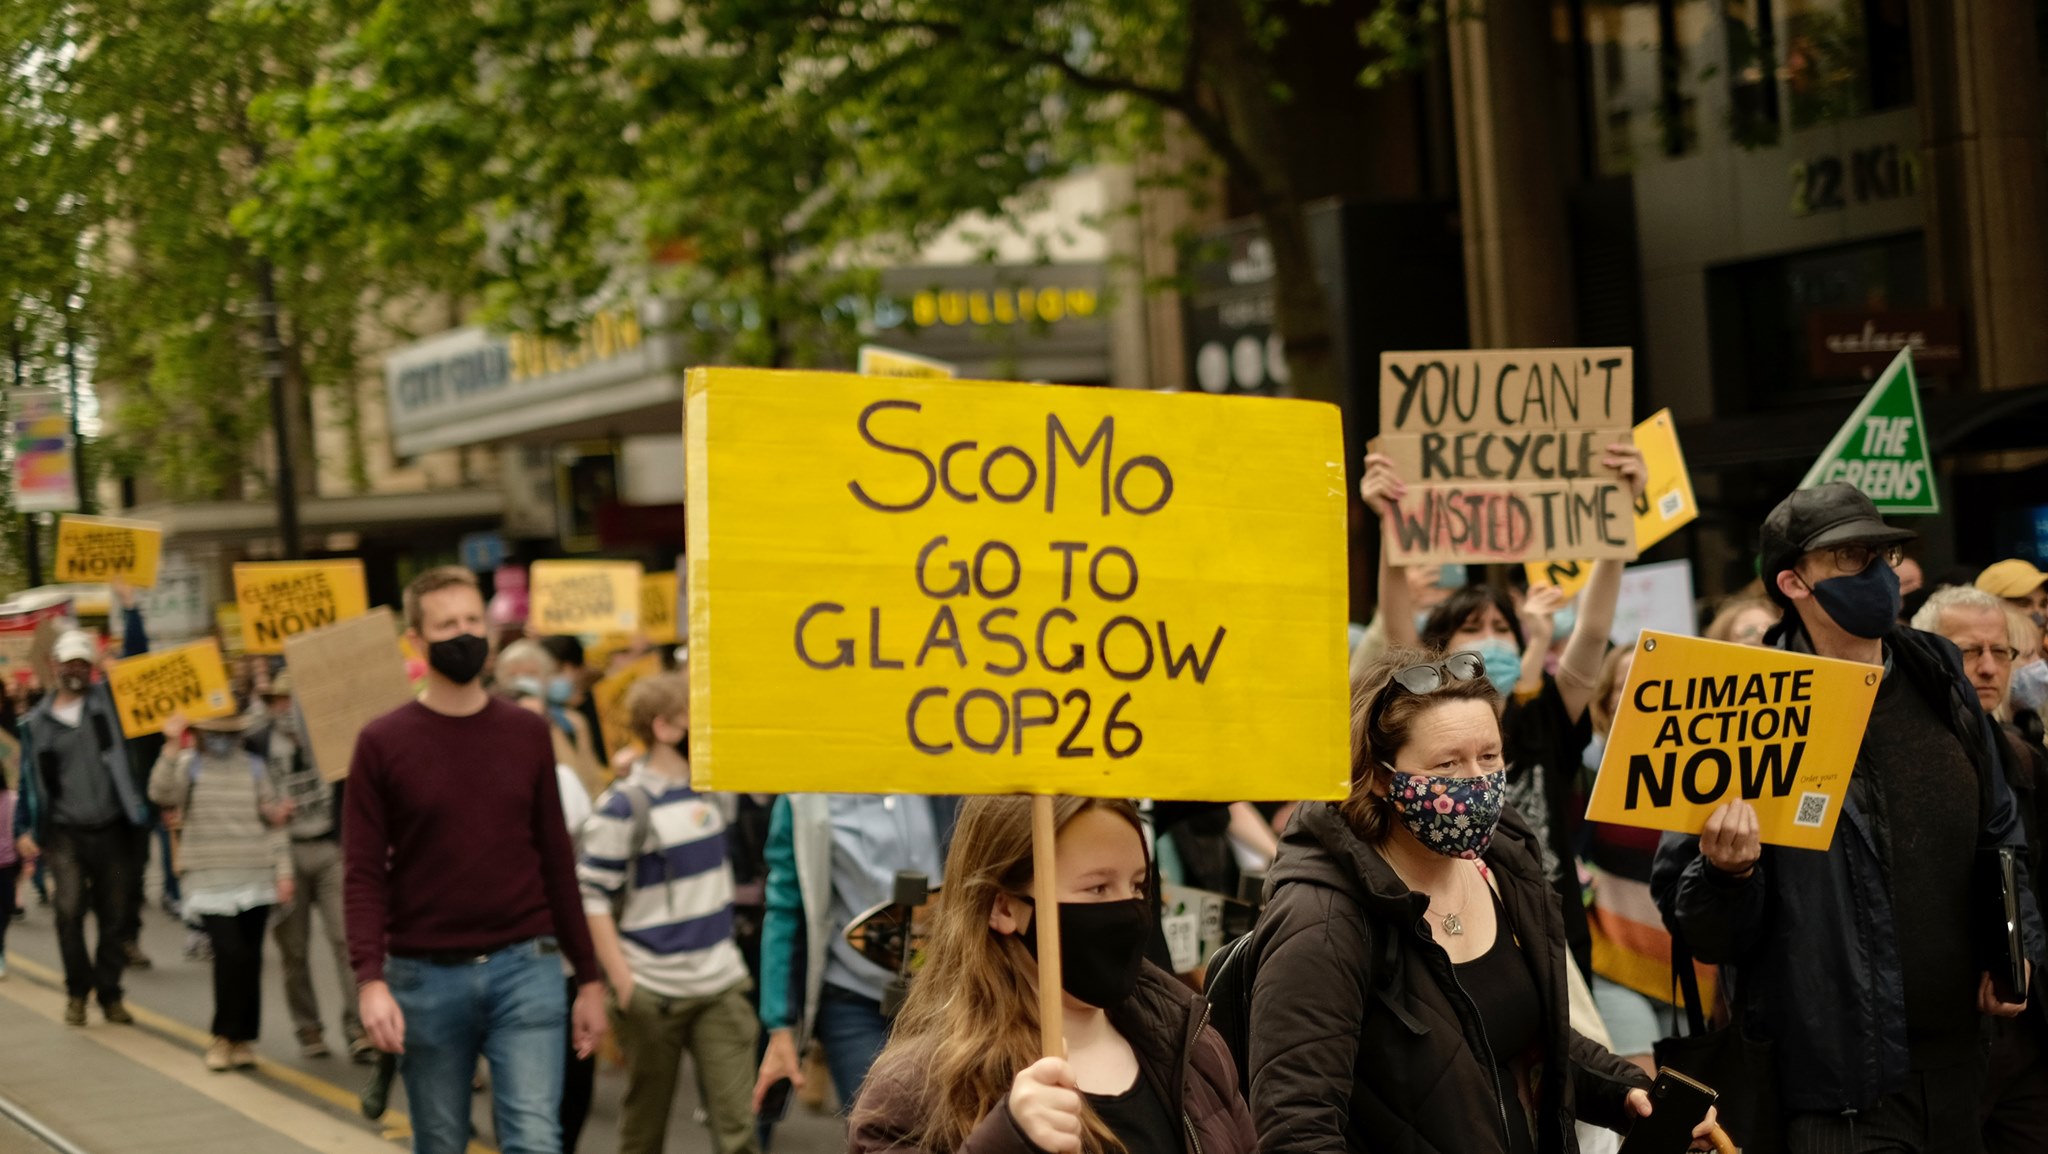 Student climate protesters take the fight online, some return to the streets